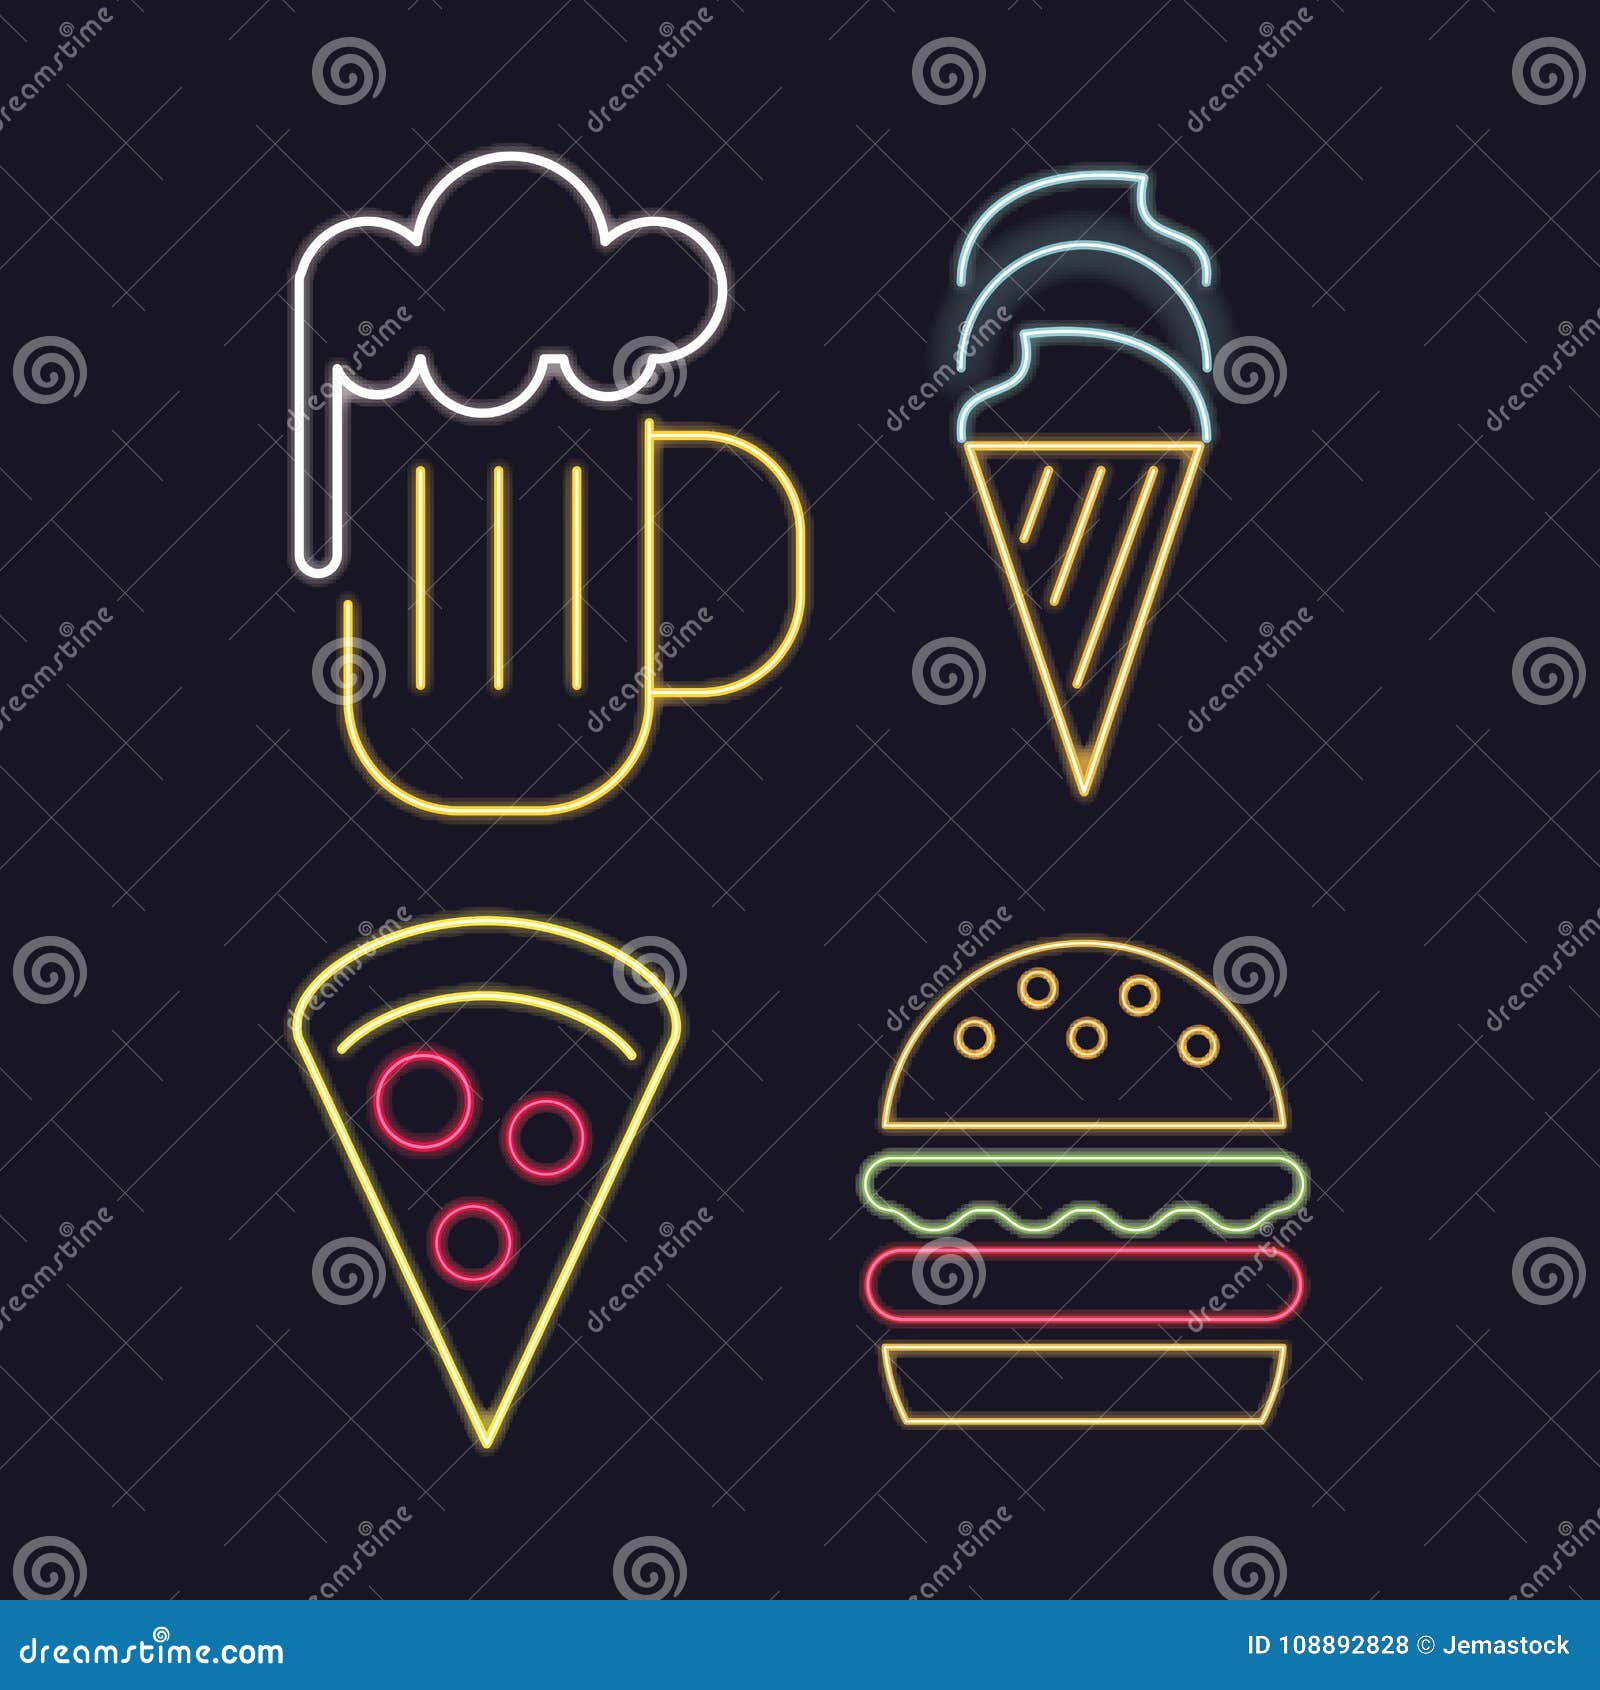 Food icons neon lights stock vector. Illustration of event - 108892828